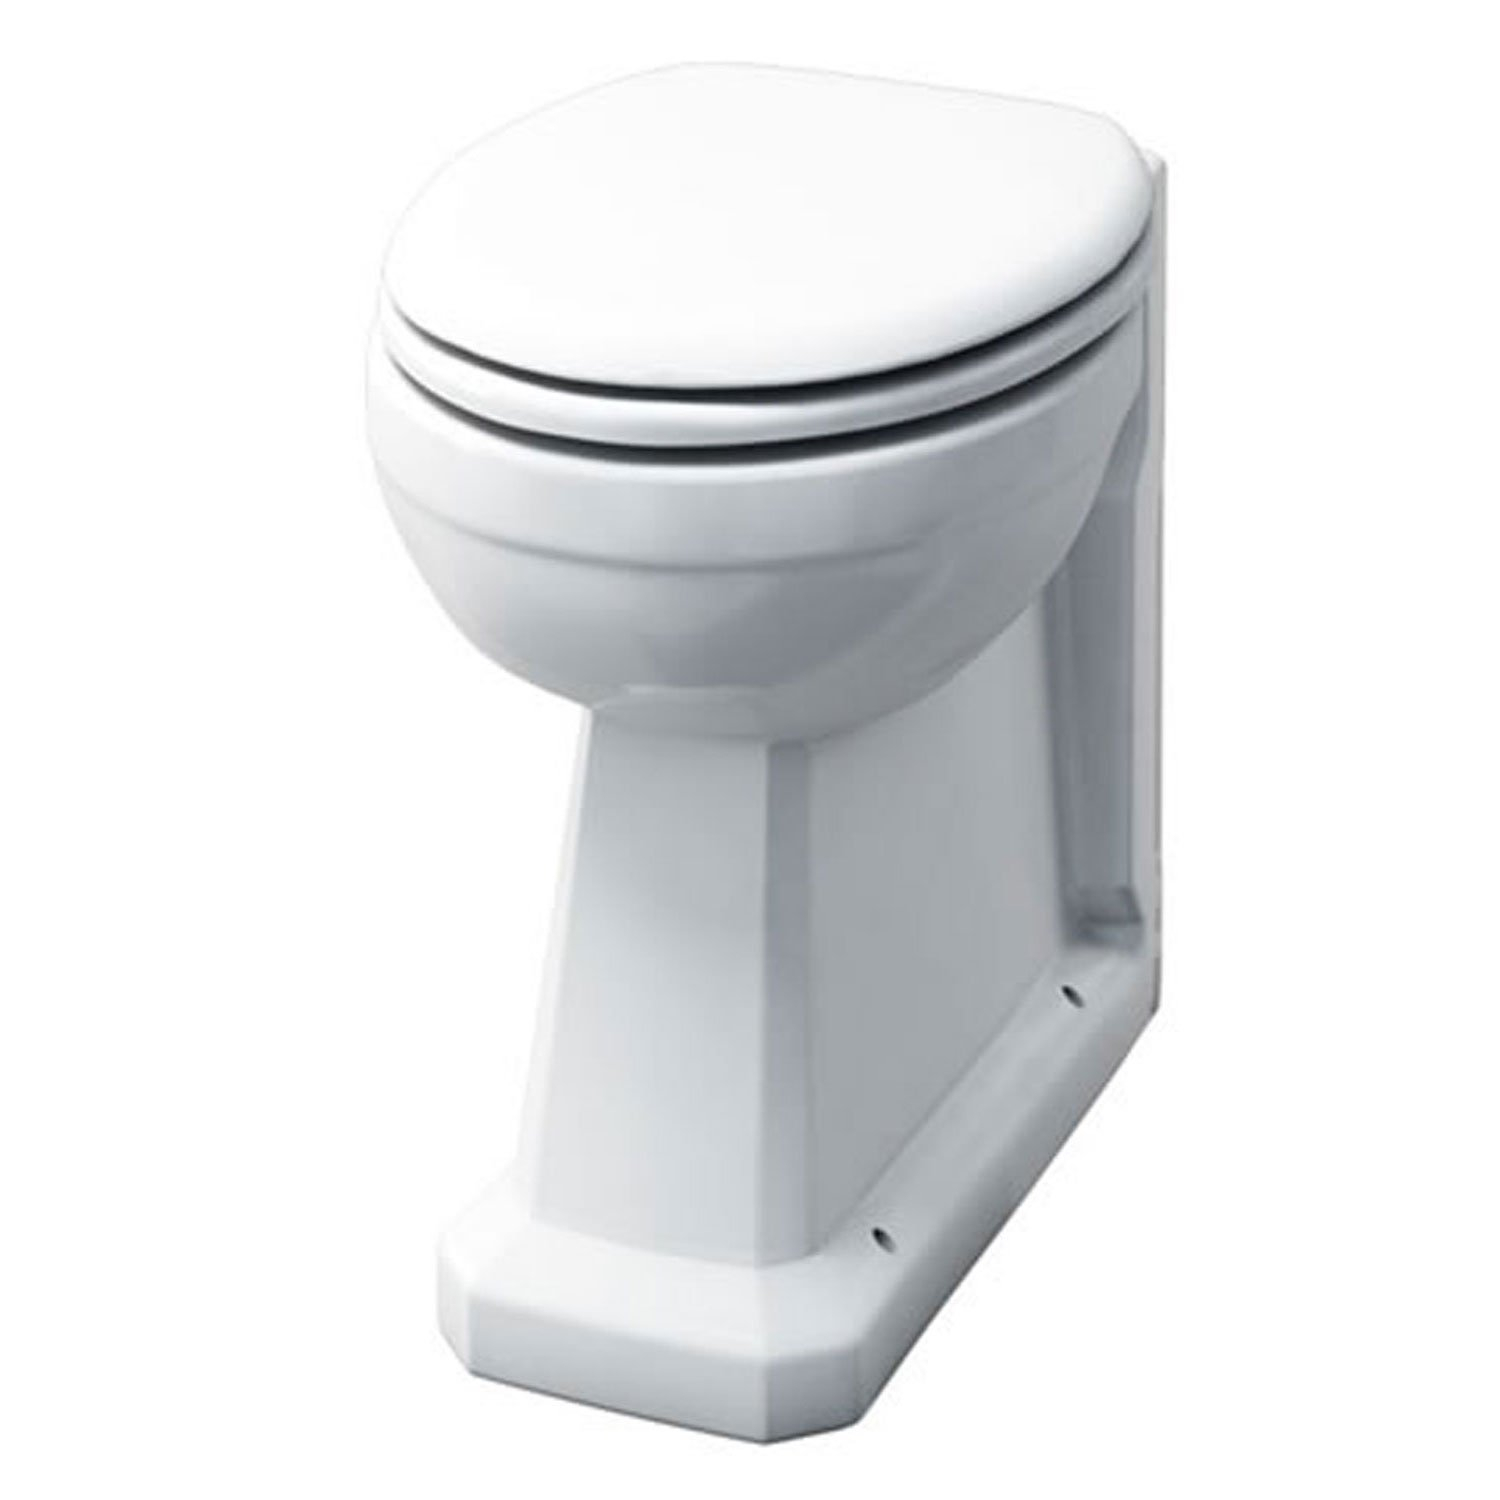 Burlington Regal 480mm Projection Back to Wall Toilet Excluding Seat -  White - P15